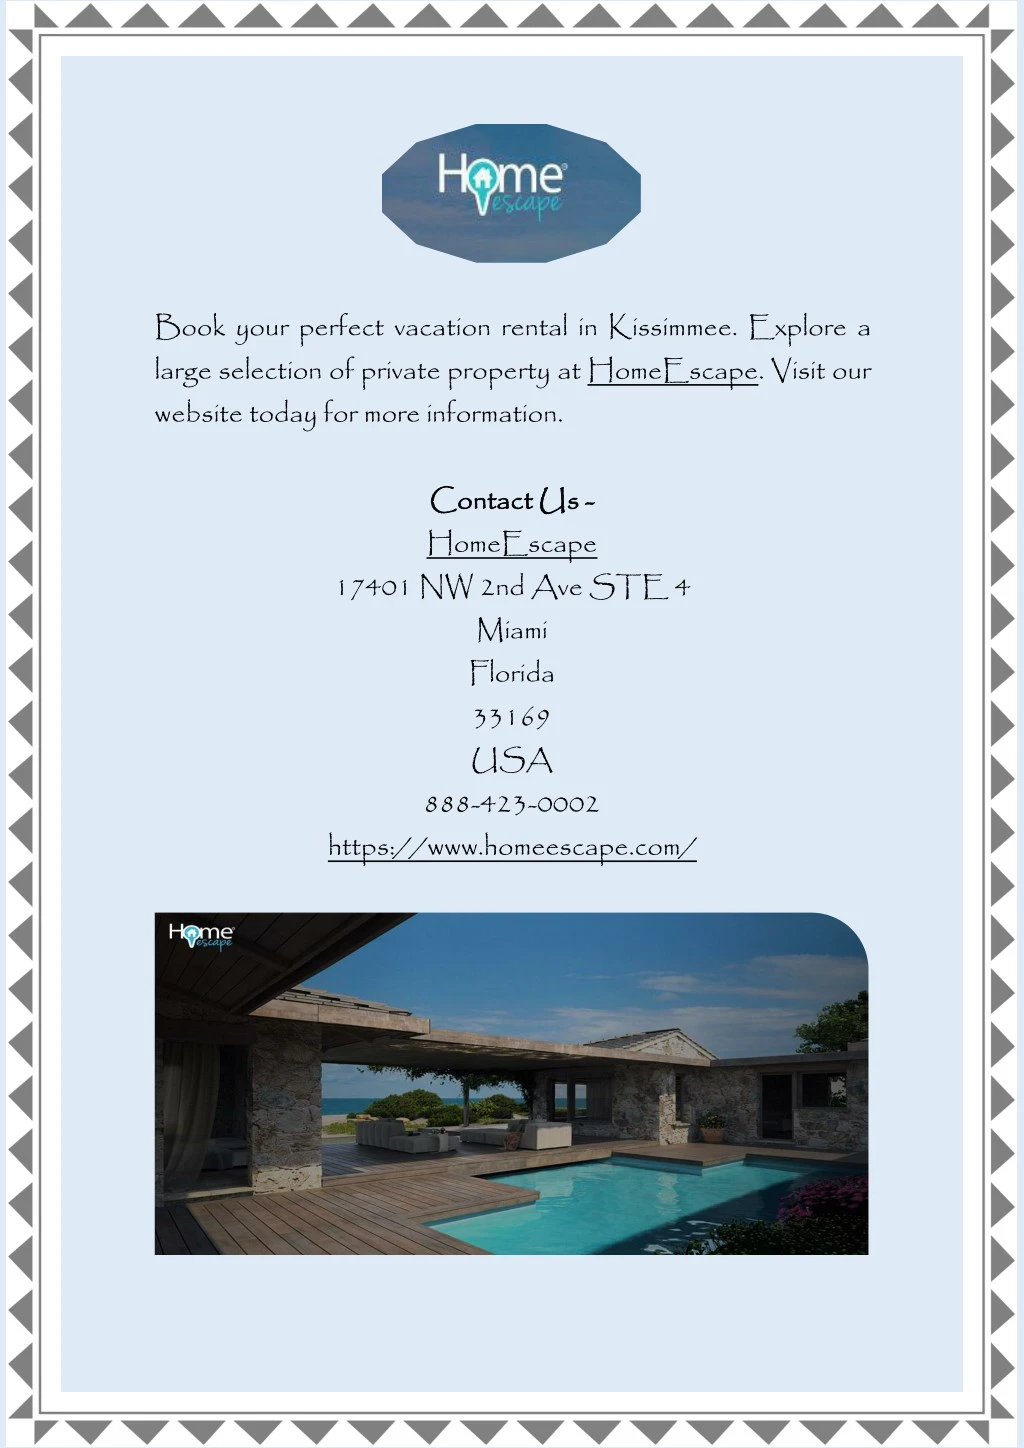 book your perfect vacation rental in kissimmee